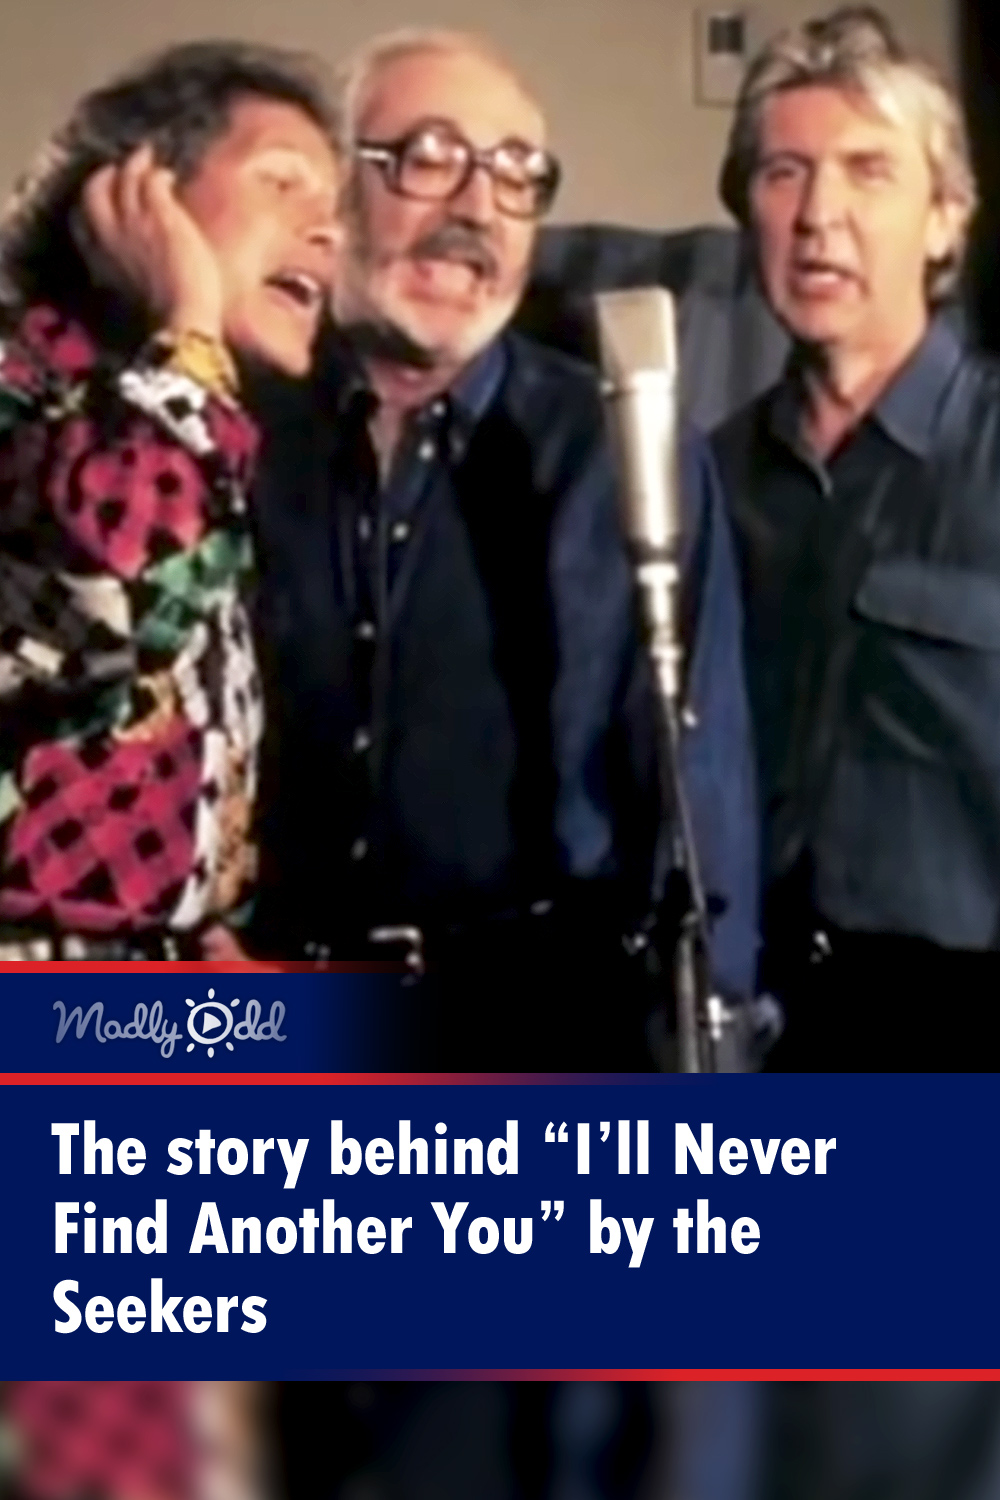 The story behind “I’ll Never Find Another You” by the Seekers